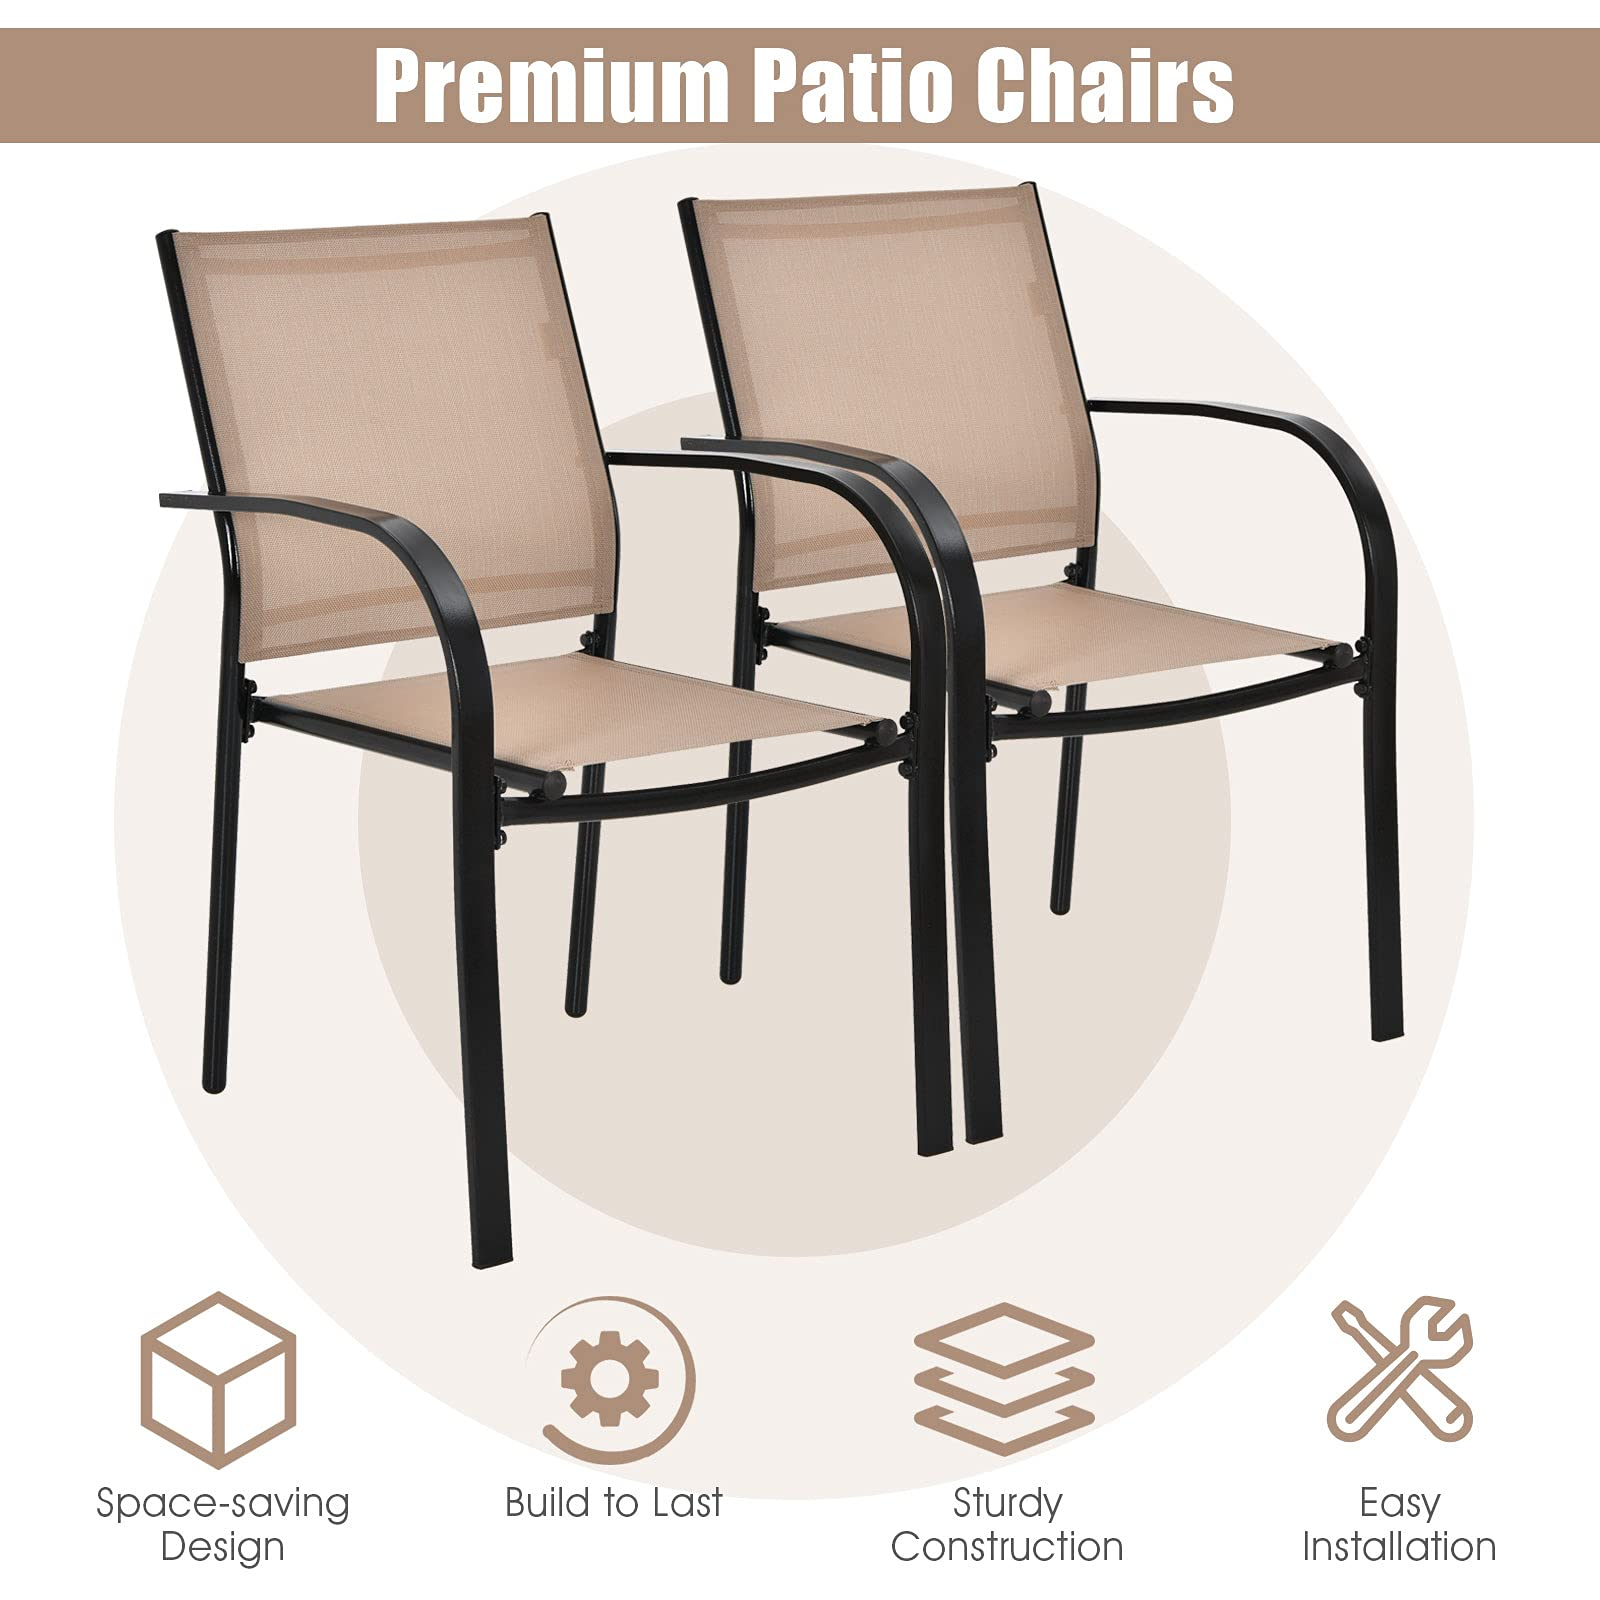 Comfortable 2 Pack Bistro Chairs for Porch Garden Backyard Poolside